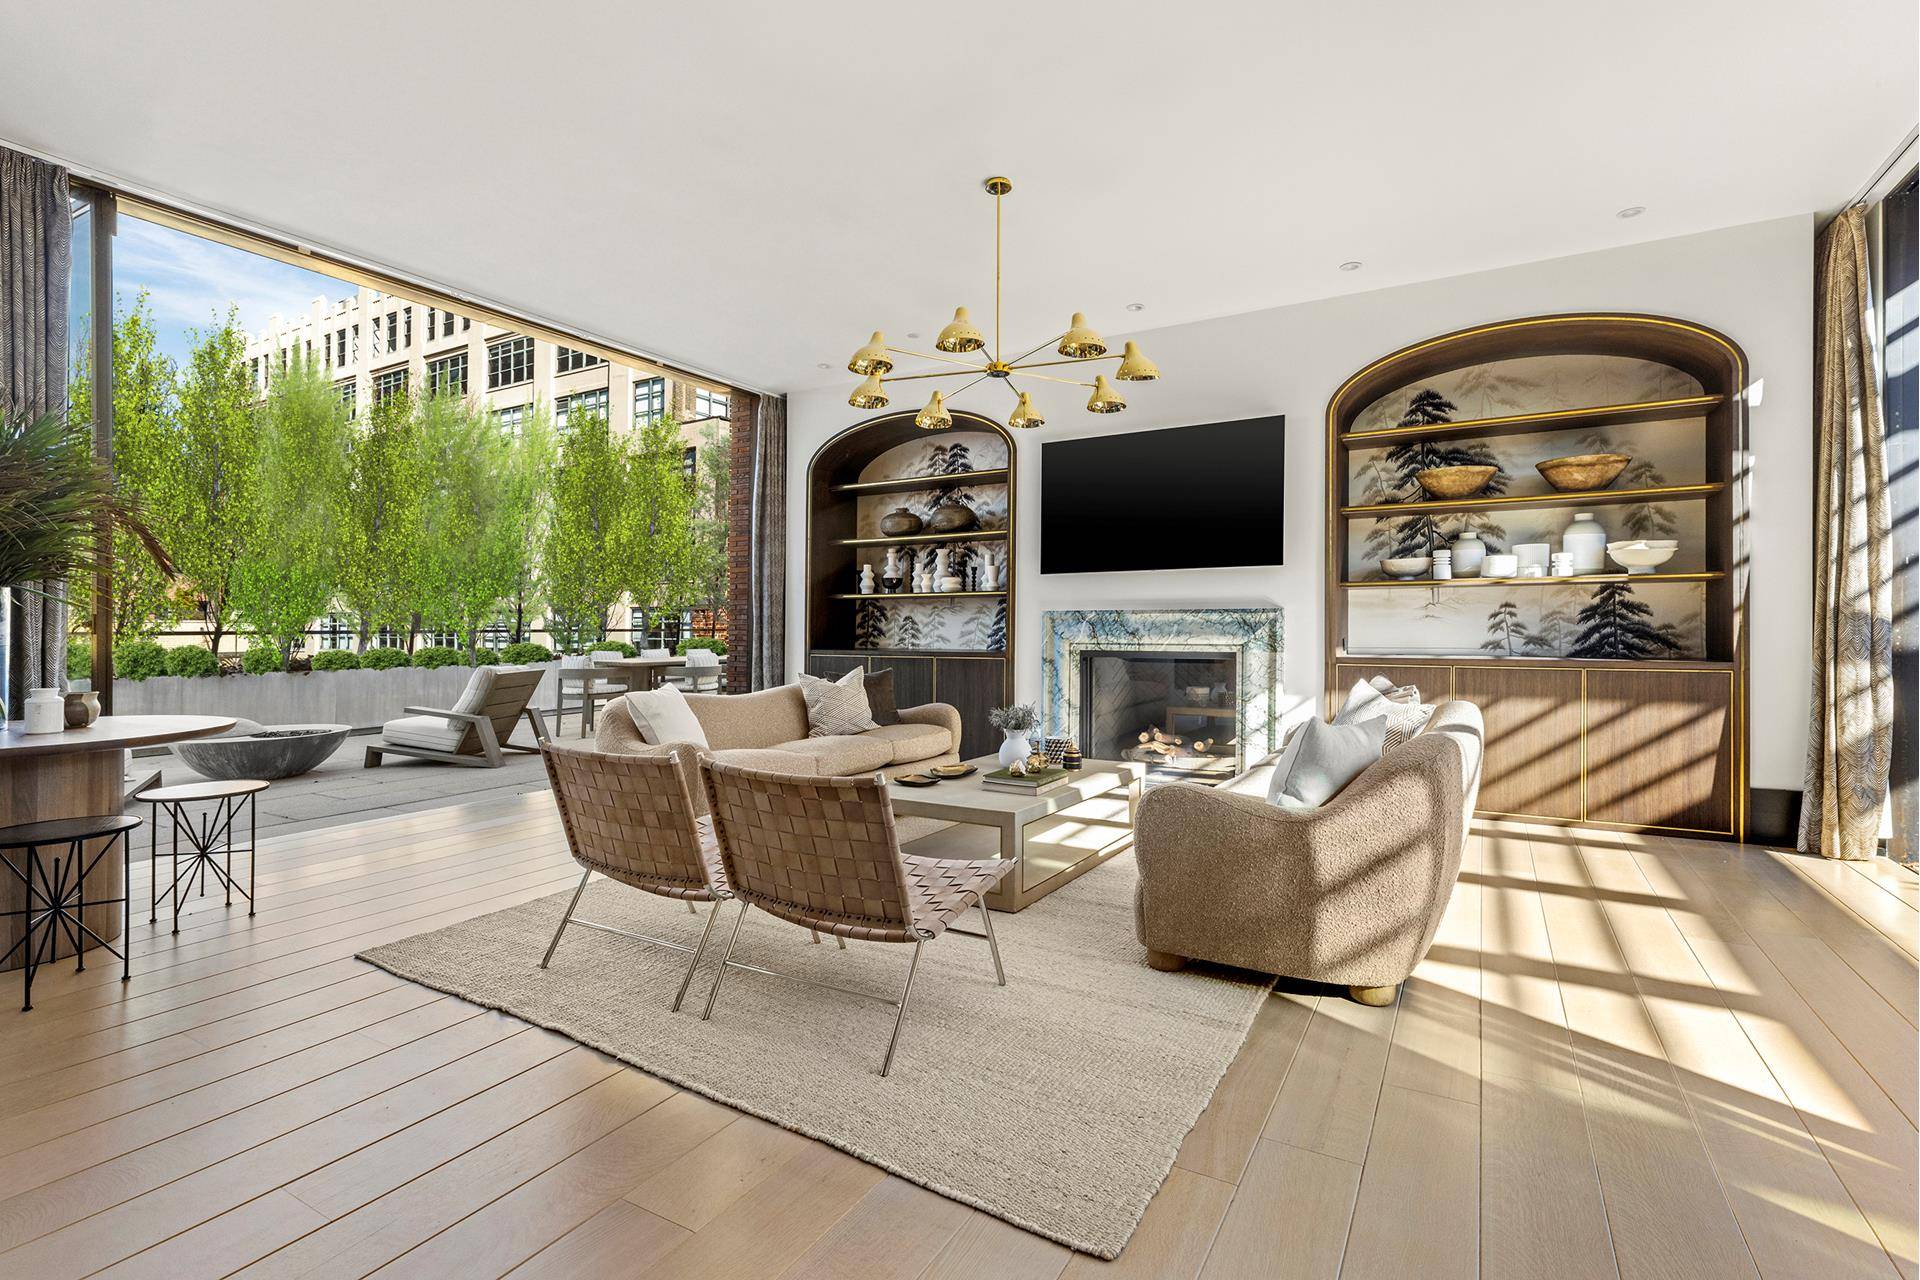 Imagine an unparalleled rooftop oasis in the heart of Tribeca with a wraparound terrace boasting of views of downtown Manhattan, all for yourself.